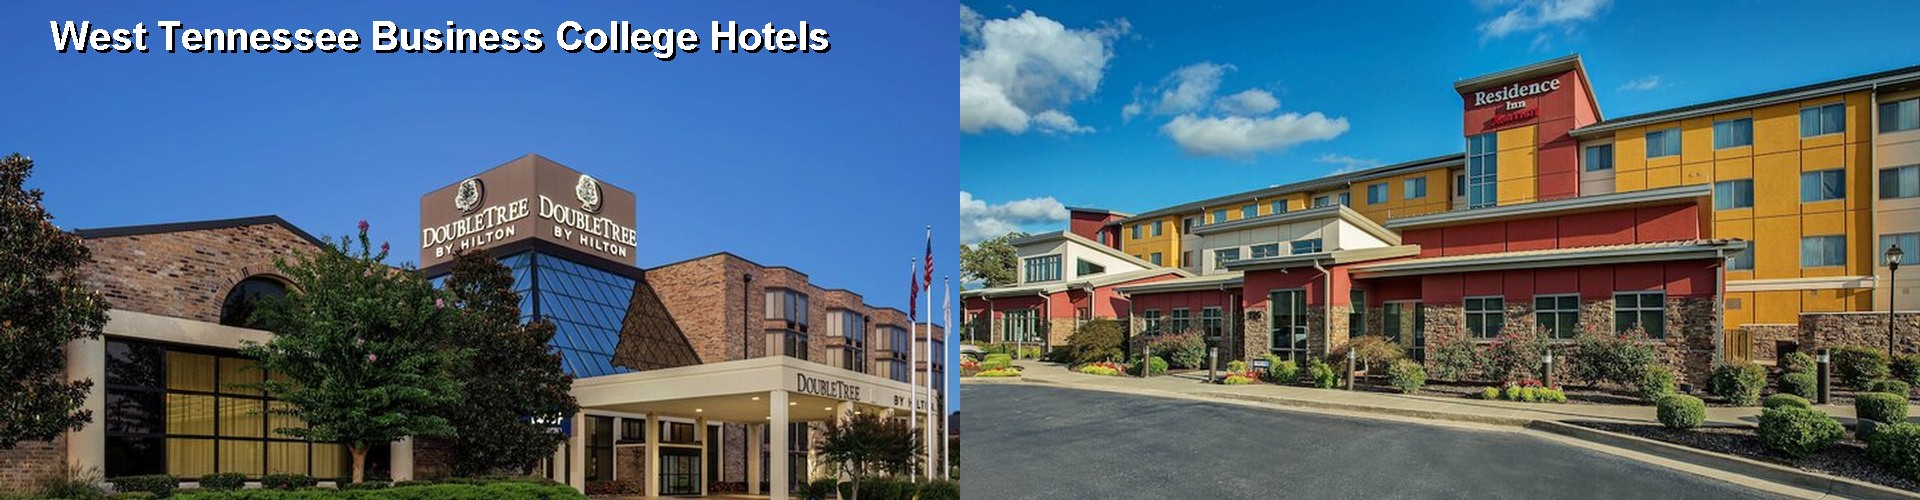 4 Best Hotels near West Tennessee Business College